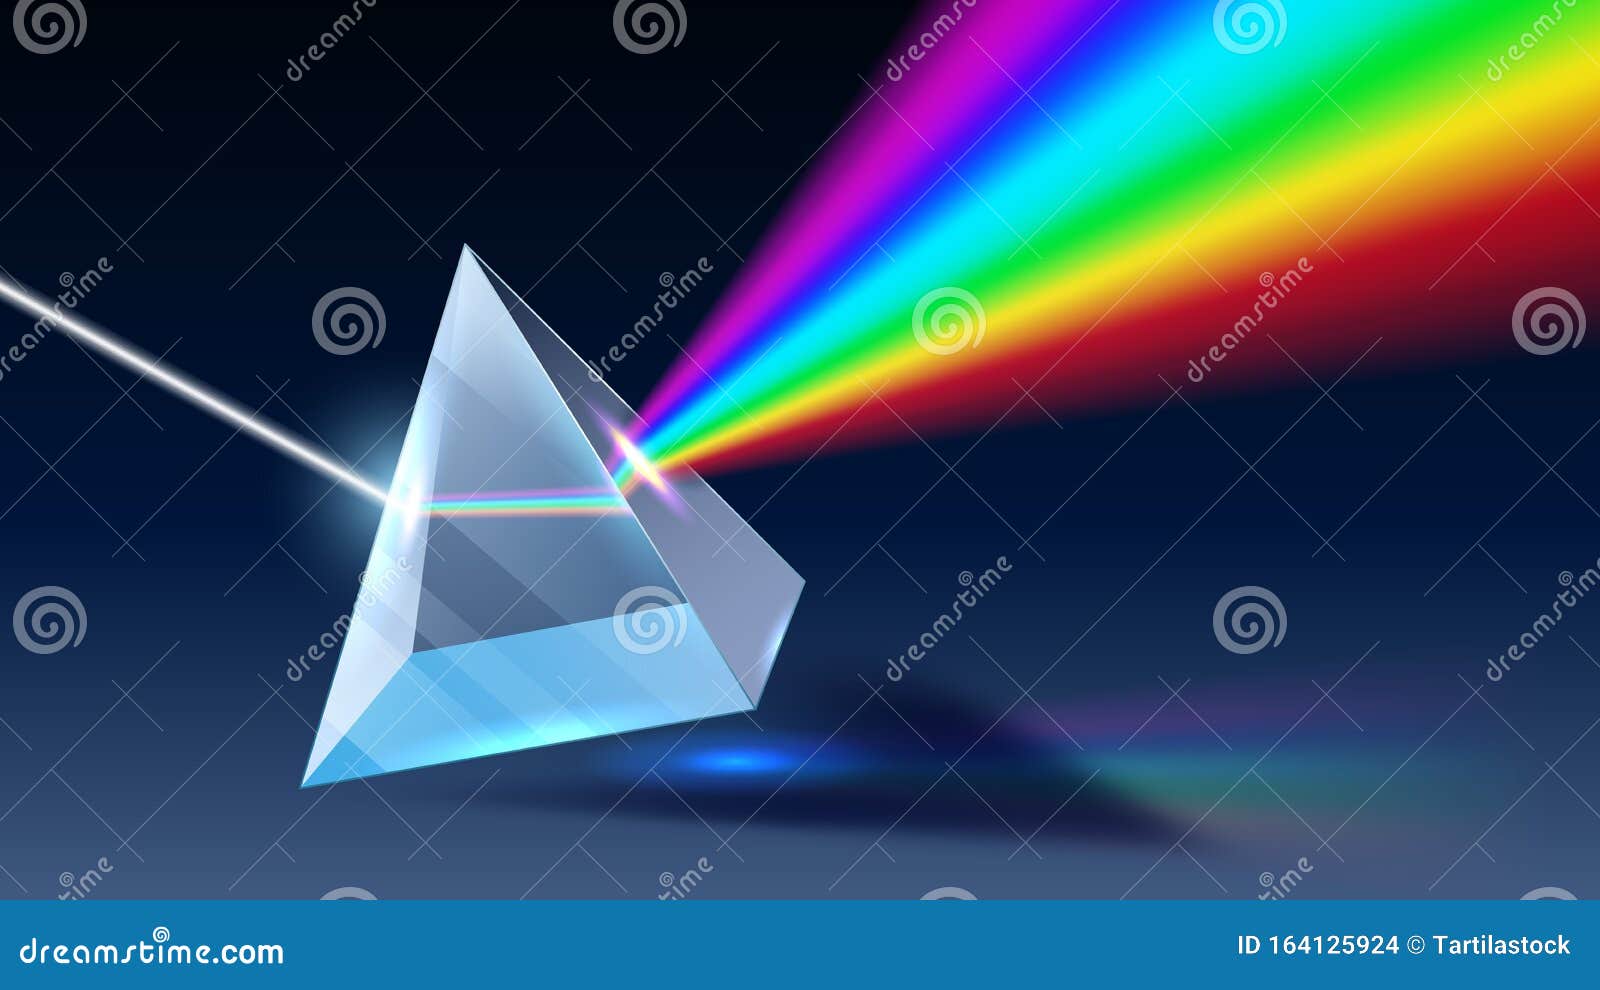 realistic prism. light dispersion, rainbow spectrum and optical effect realistic 3d  